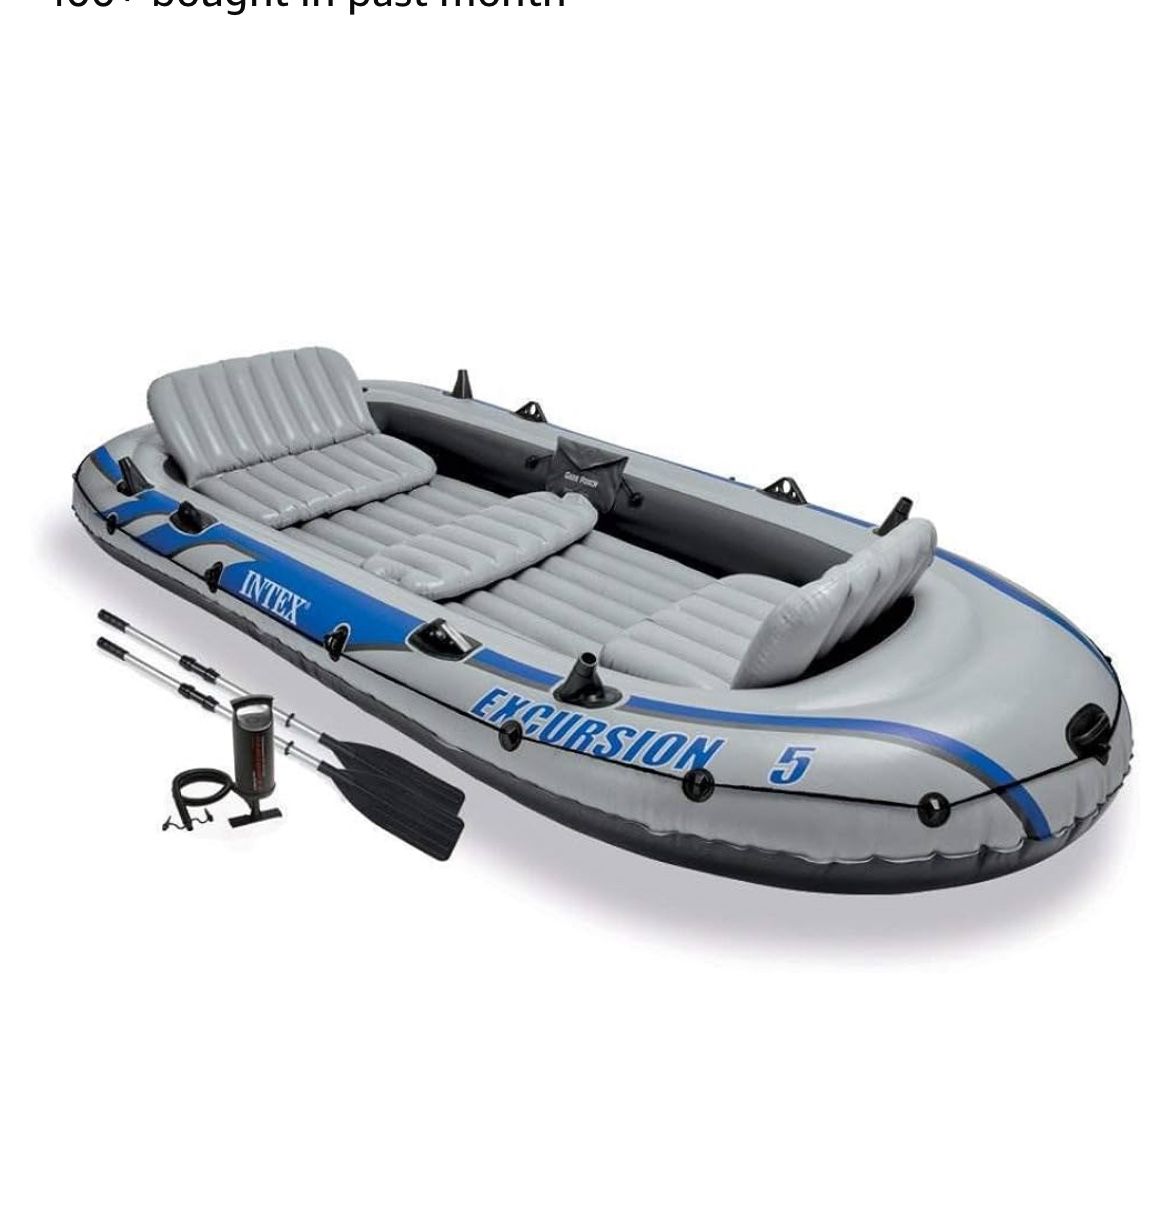 Excursion 5 Inflatable Boat 